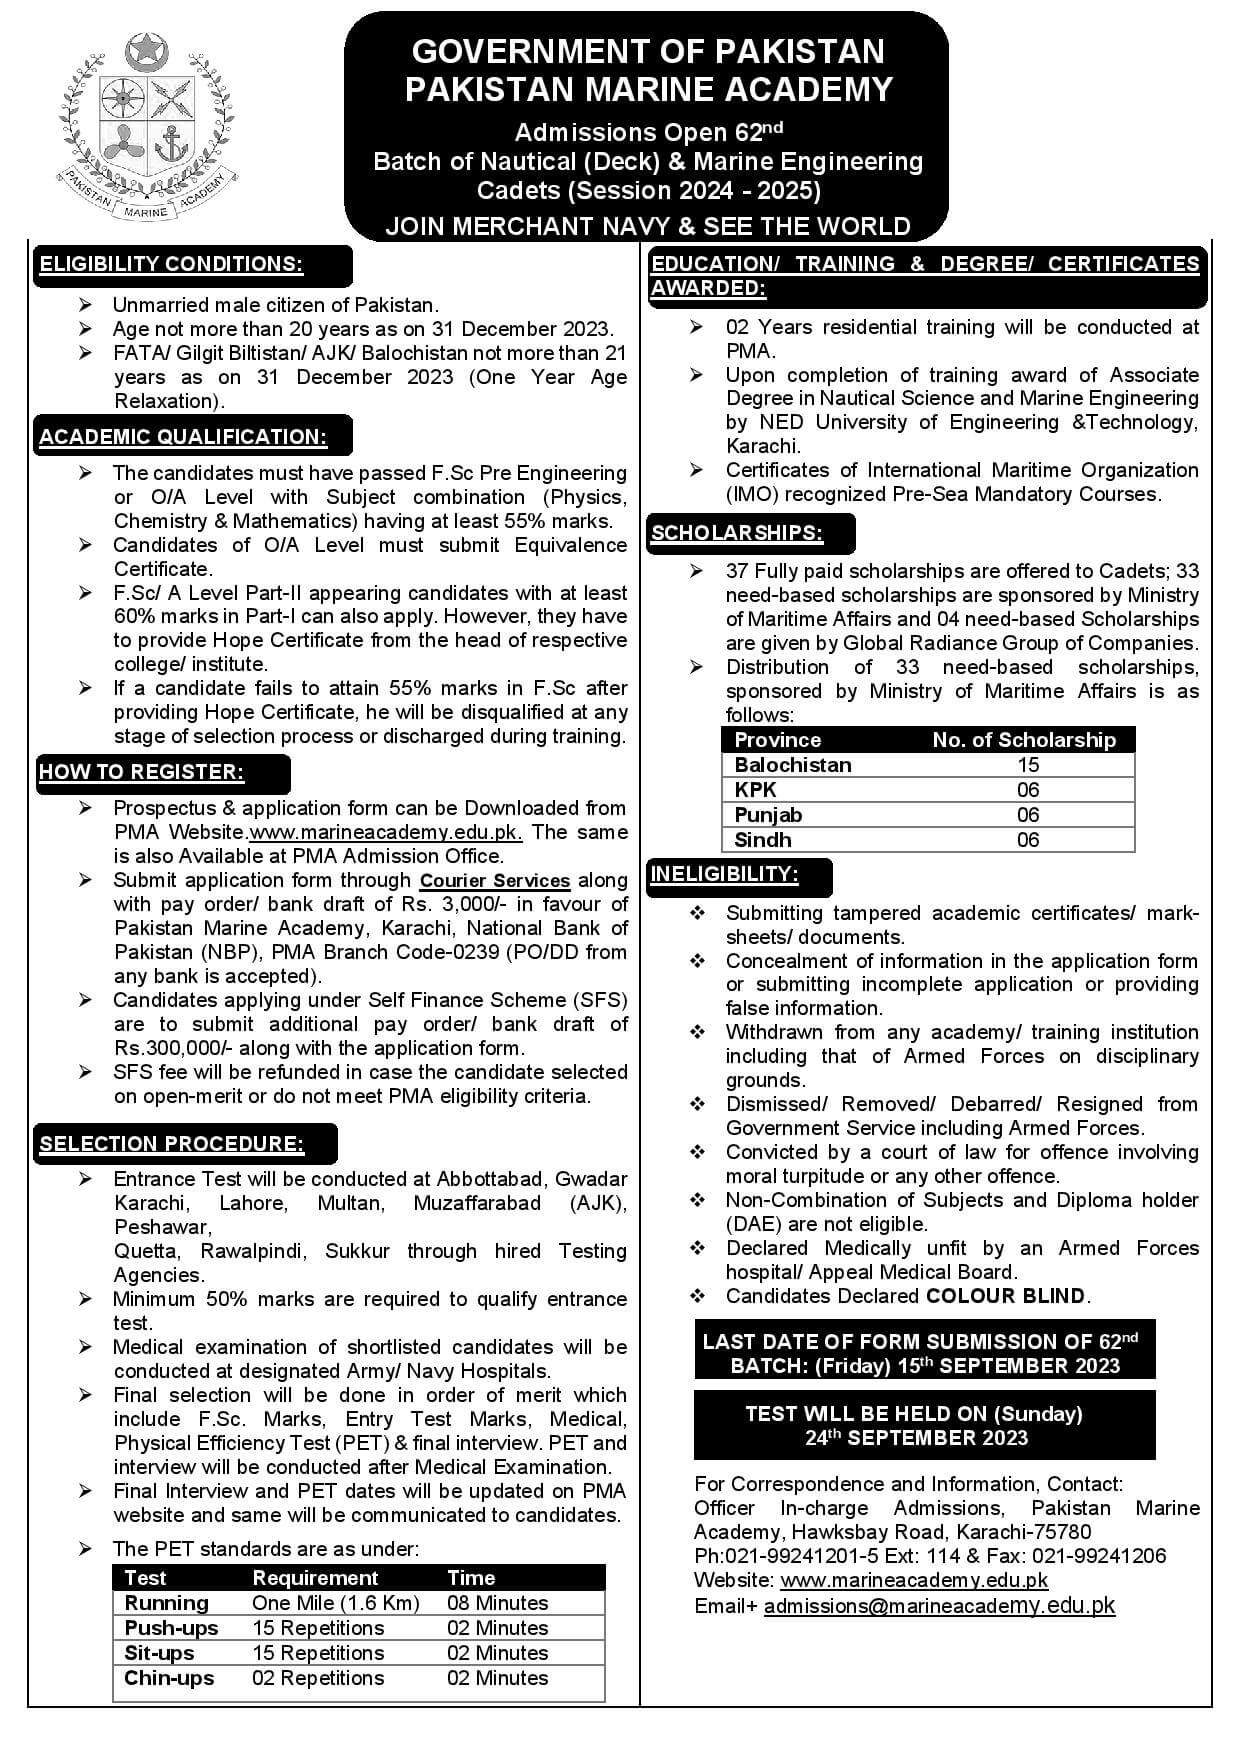 Join Pakistan Marine Academy Admission 2023 Apply Online